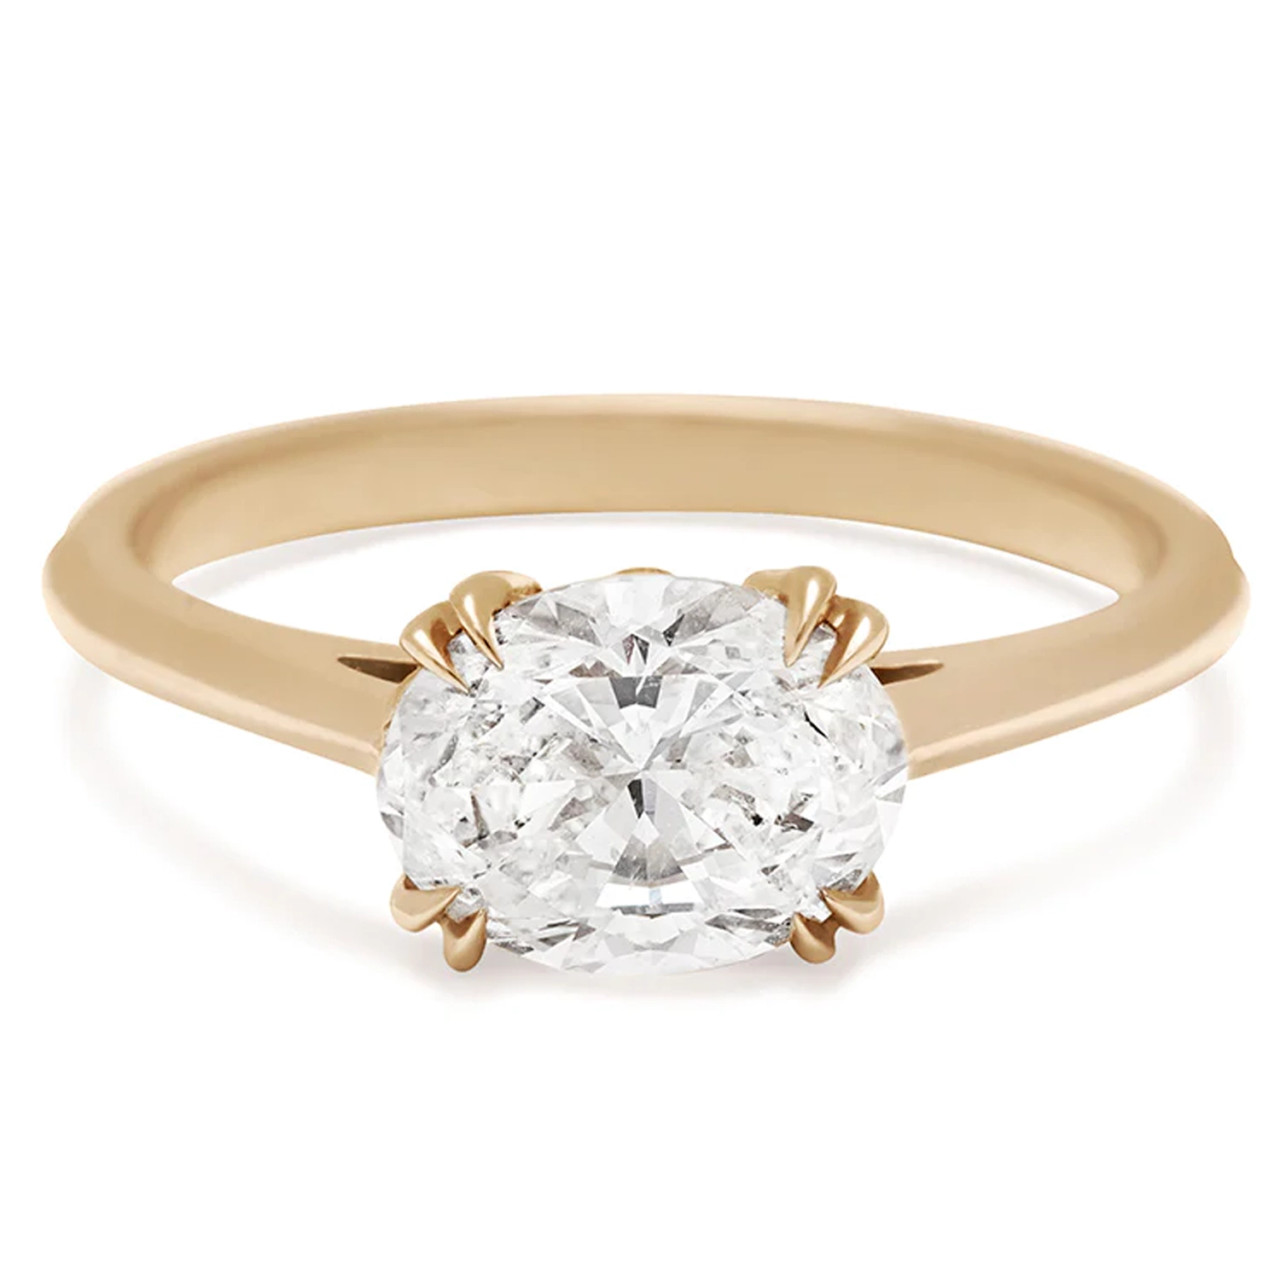 Anna Sheffield + East/West Oval 1.5ct Lab-Grown Diamond Solitaire Ring